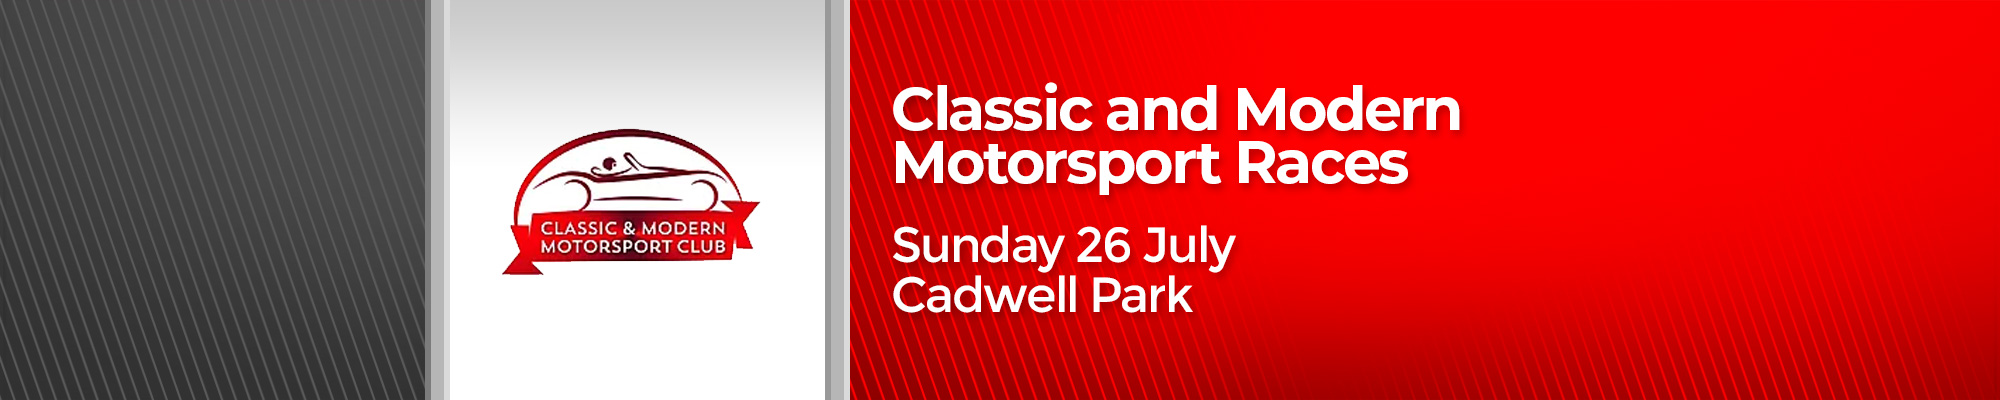 Classic and Modern Motorsport Races